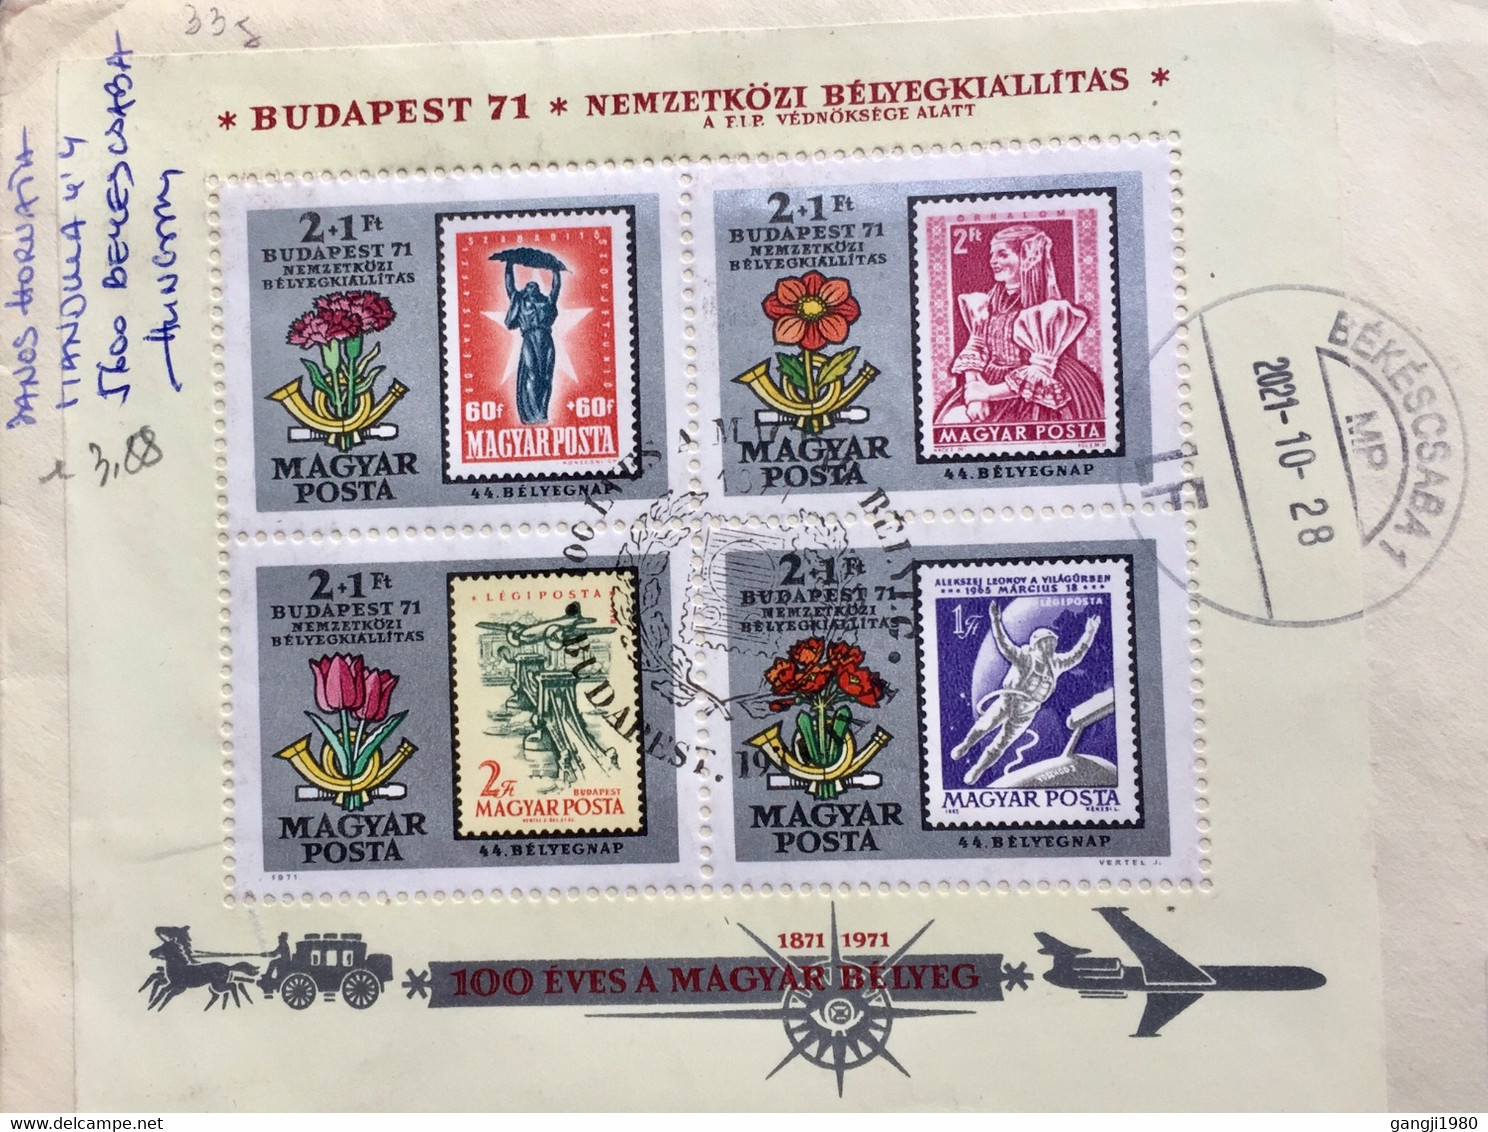 HUNGARY 2021 STATIONERY 1971 BUDAPEST- 71 BLOCK MINIATURE SHEET AIRMAIL REGISTERED USED COVER BEKEJCSABA INDIA USED 50 - Covers & Documents